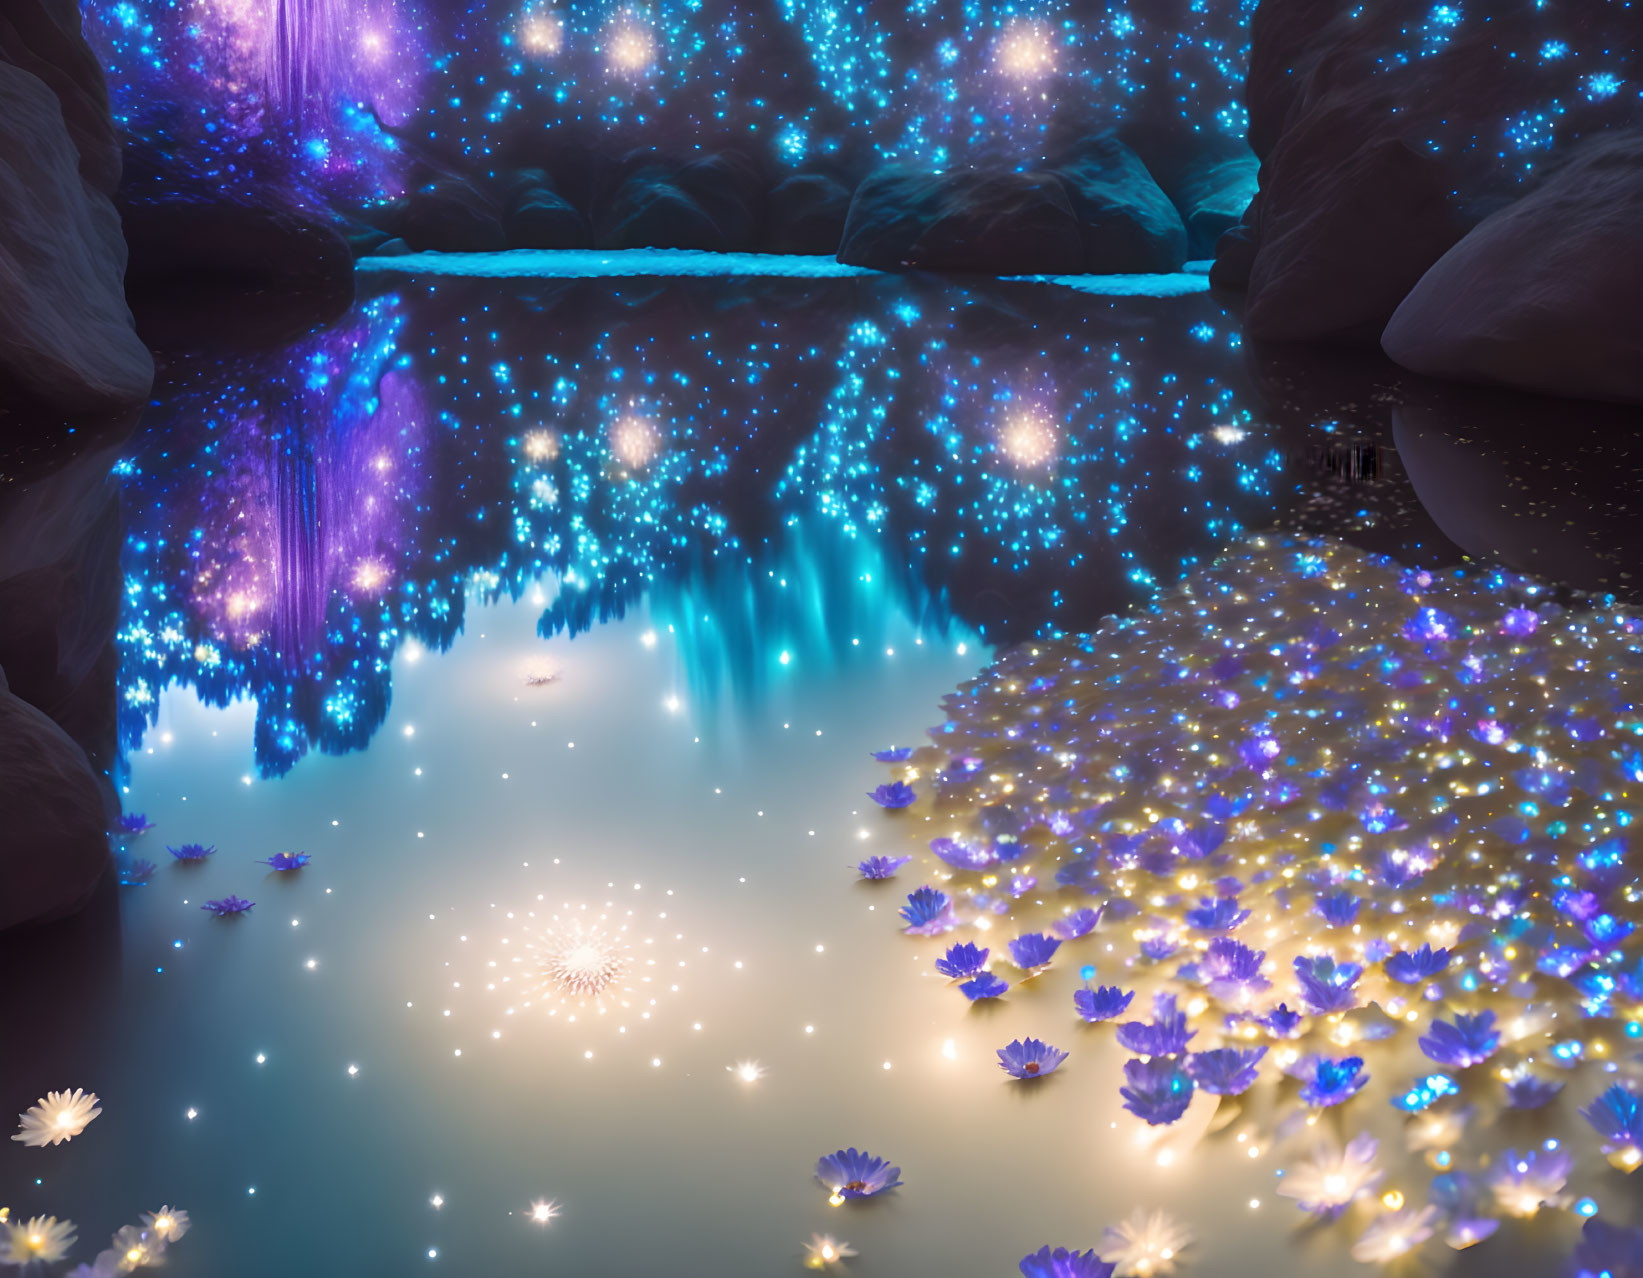 Mystical cave with glowing flowers and starry sky reflection